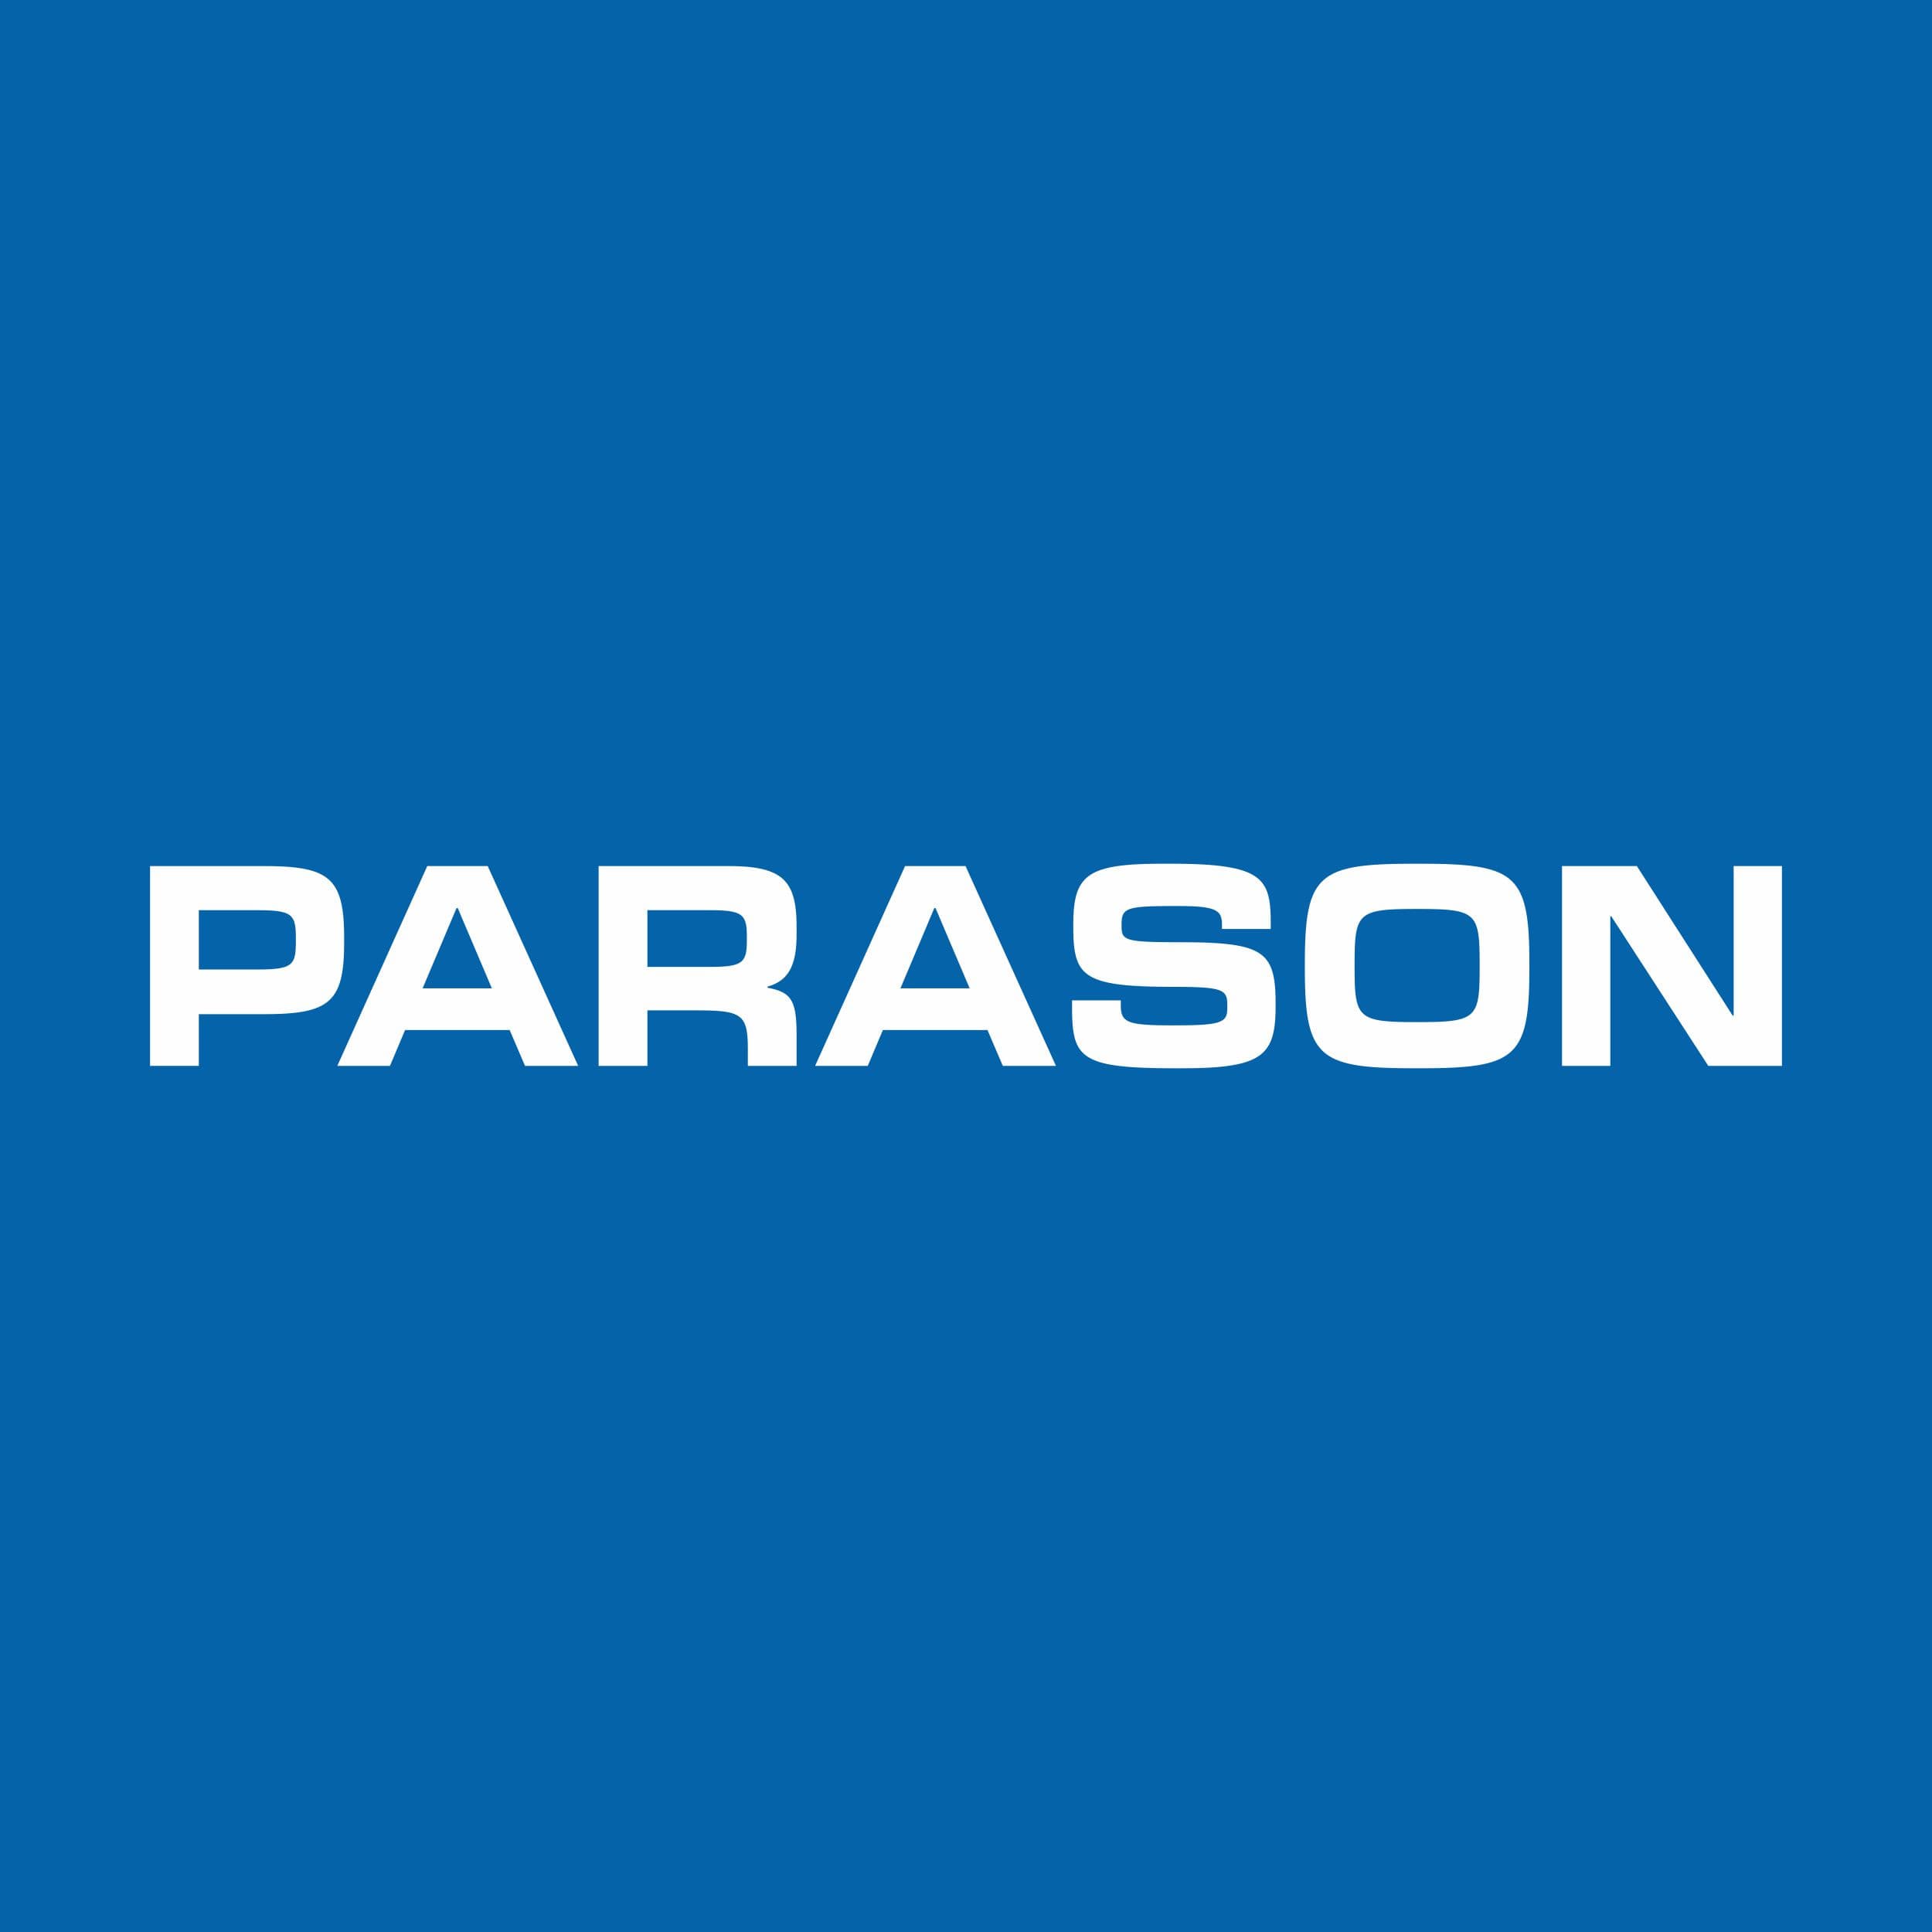 PARASON MACHINERY (INDIA) PRIVATE LIMITED